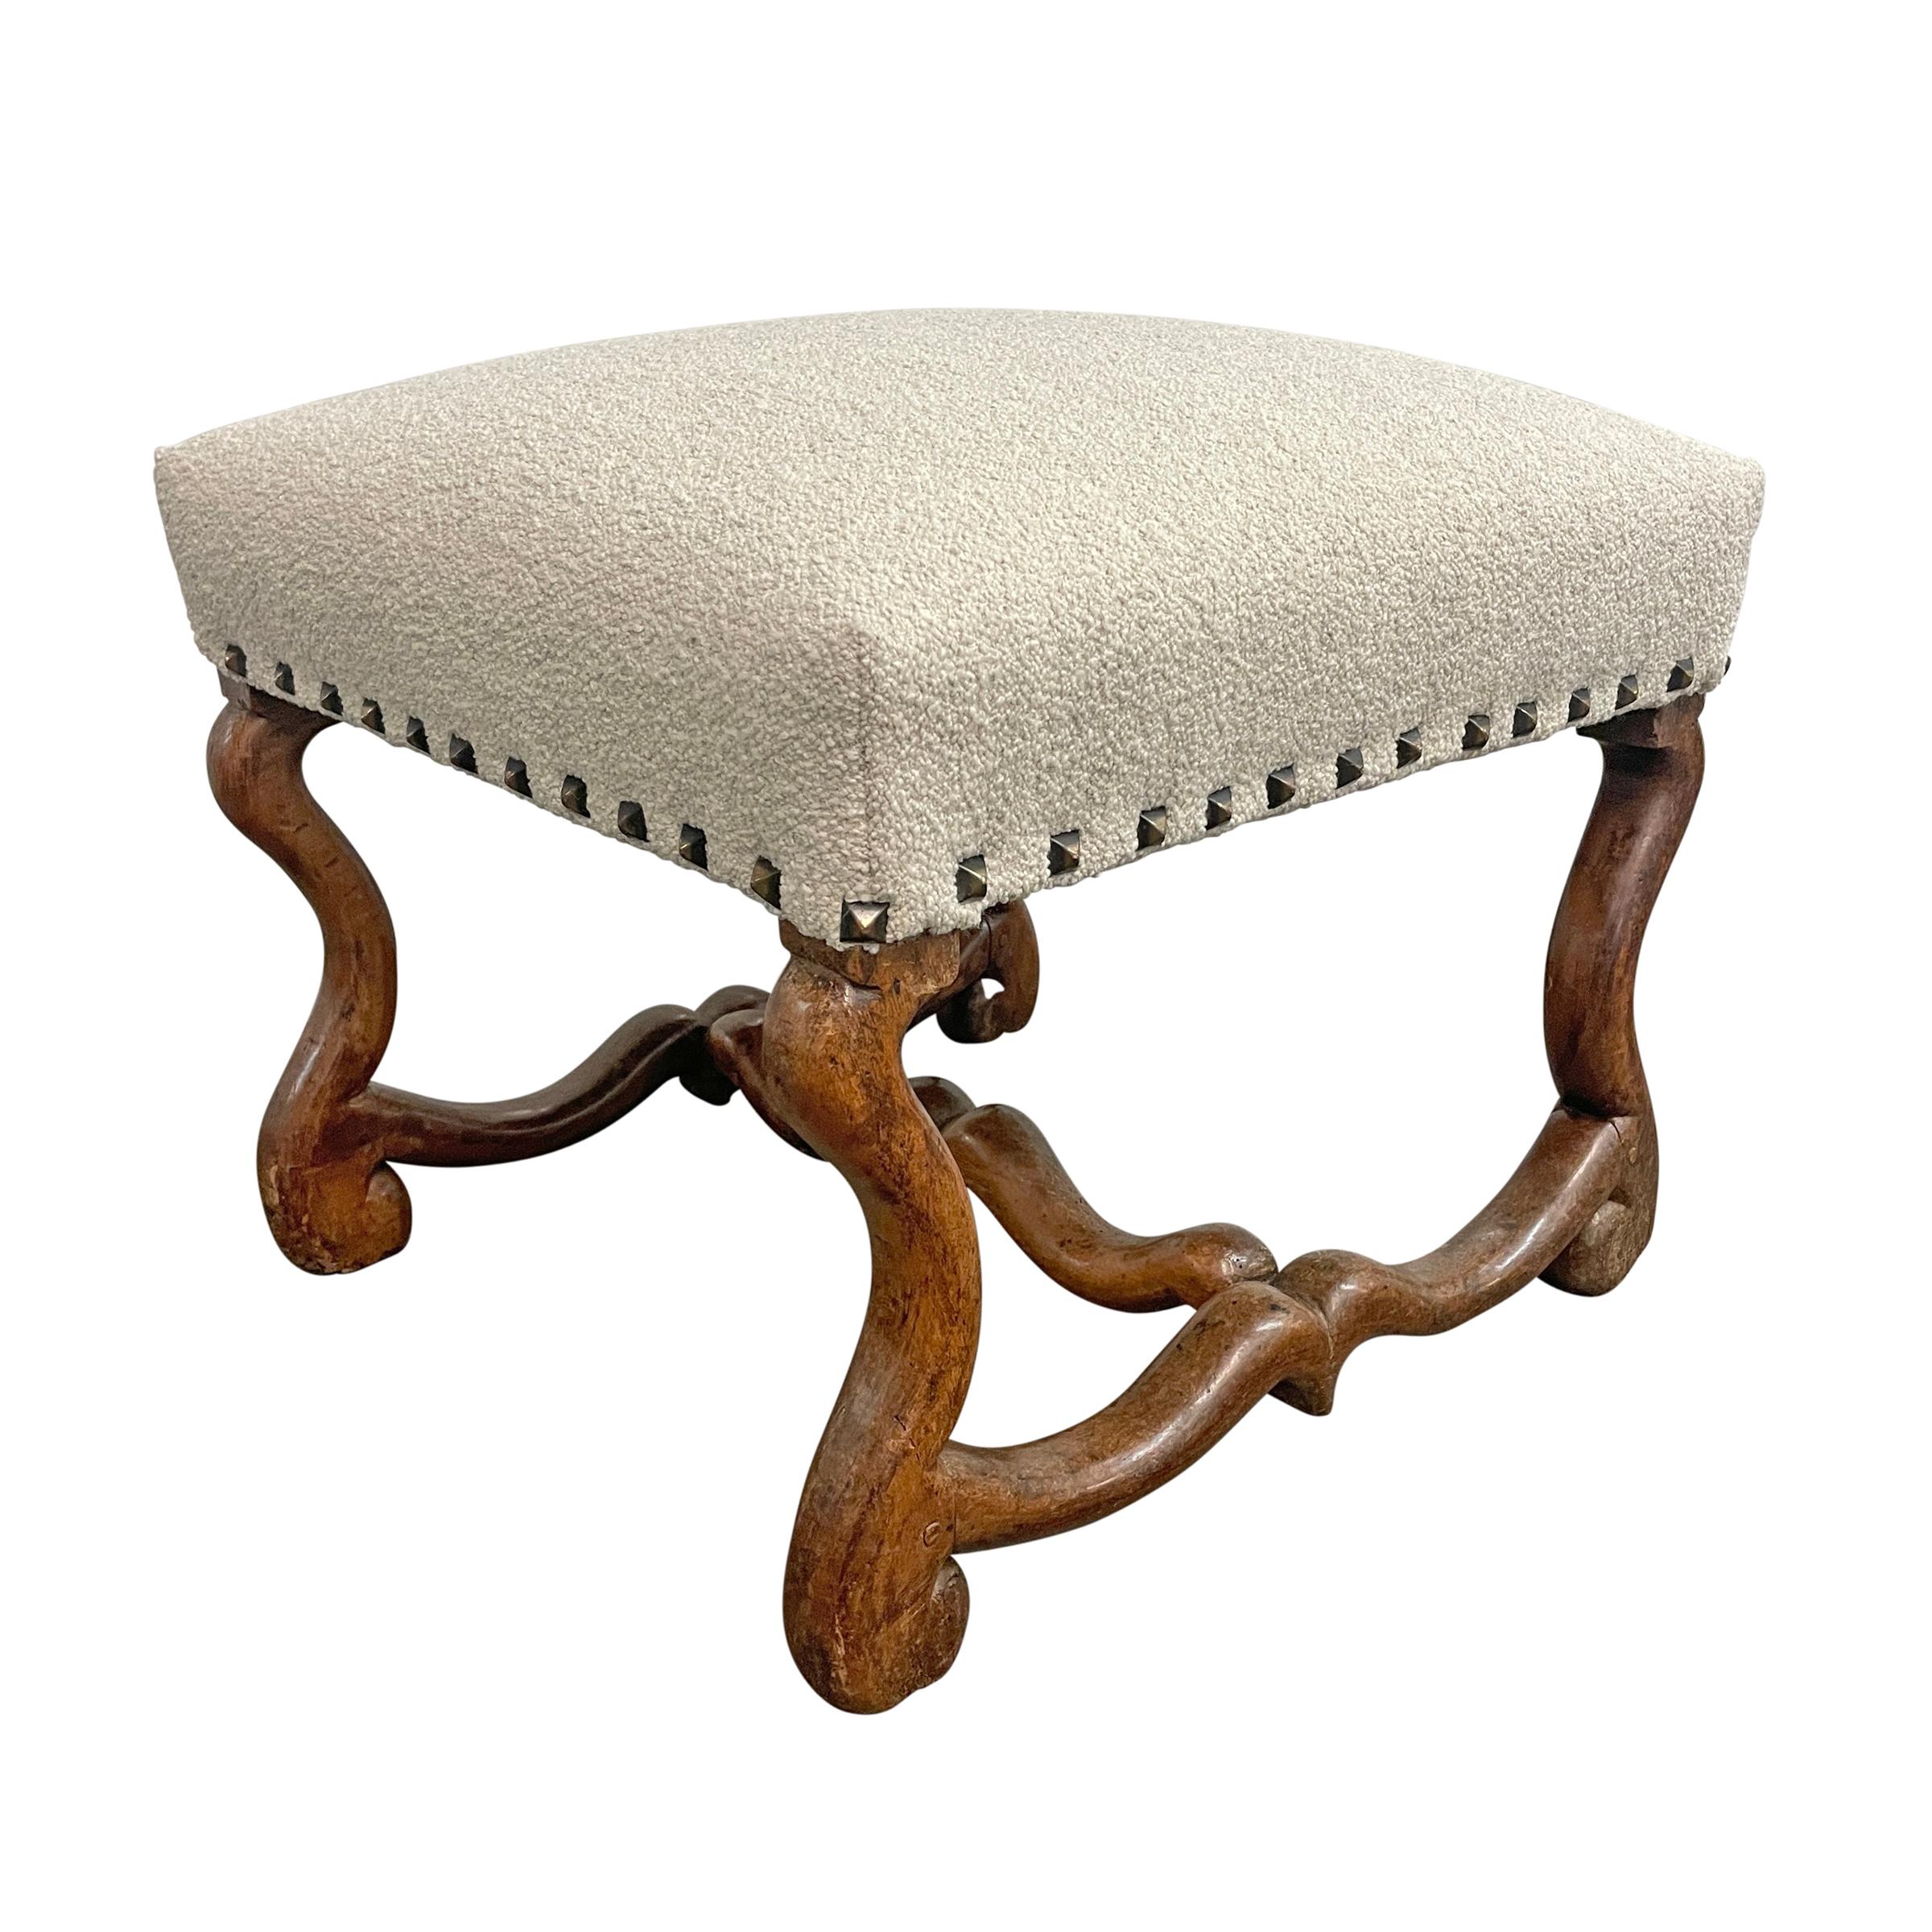 17th Century French Louis XIII Os-de-mouton Stool In Good Condition For Sale In Chicago, IL